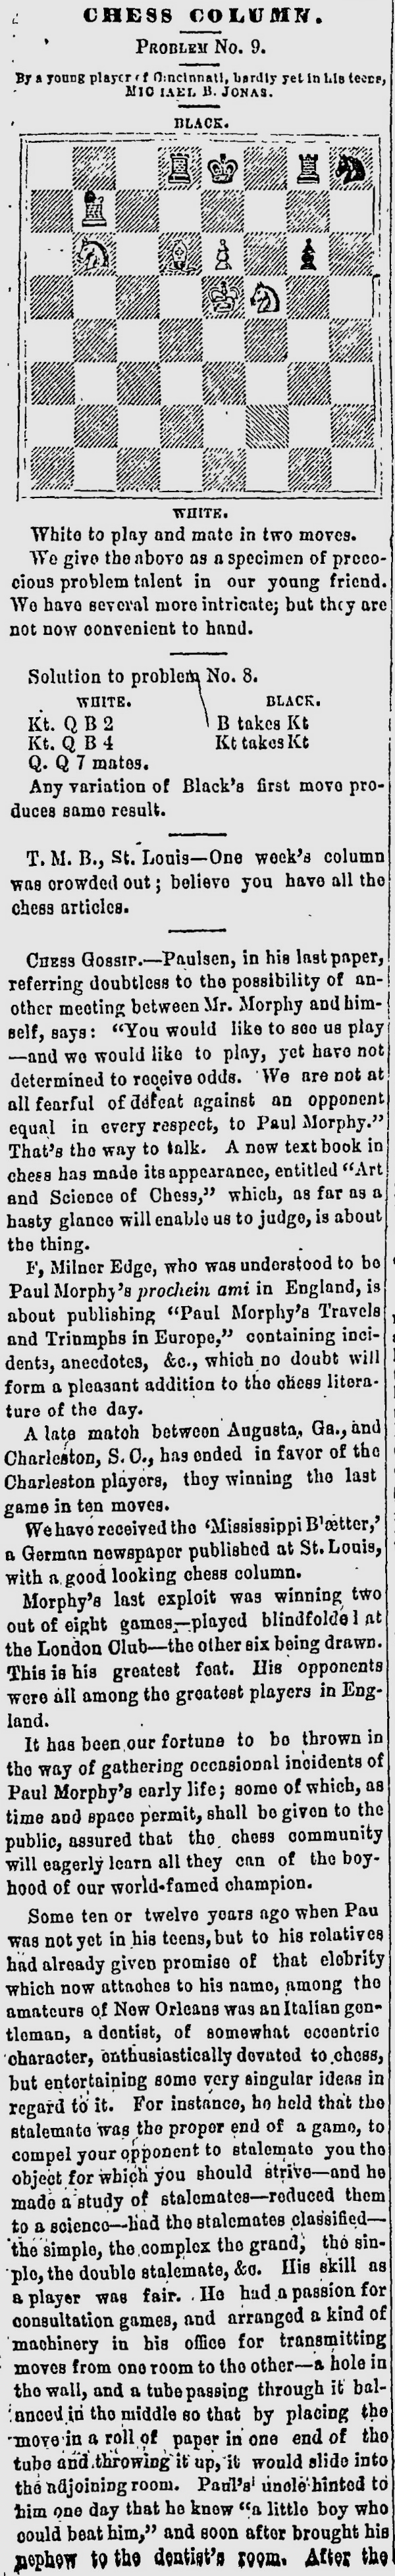 1859.05.13-01 Quincy Daily Whig.png